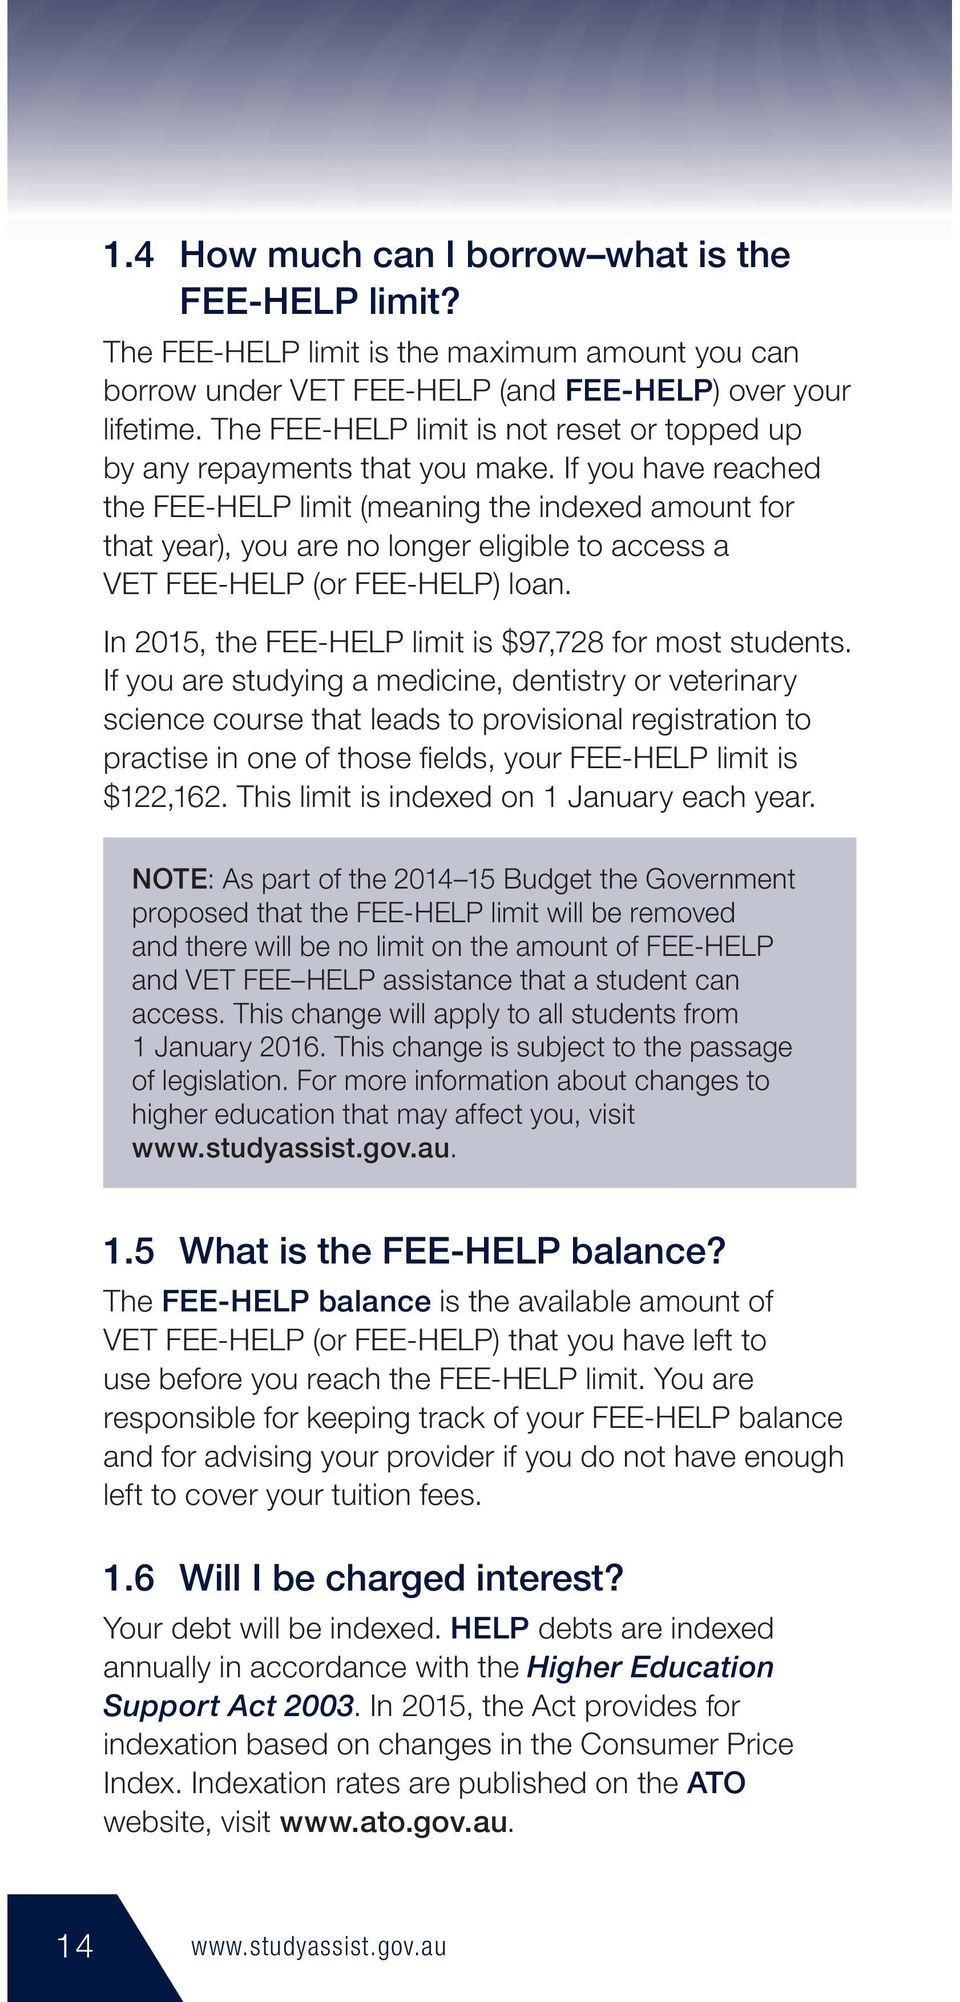 If you have reached the FEE-HELP limit (meaning the indexed amount for that year), you are no longer eligible to access a VET FEE-HELP (or FEE-HELP) loan.